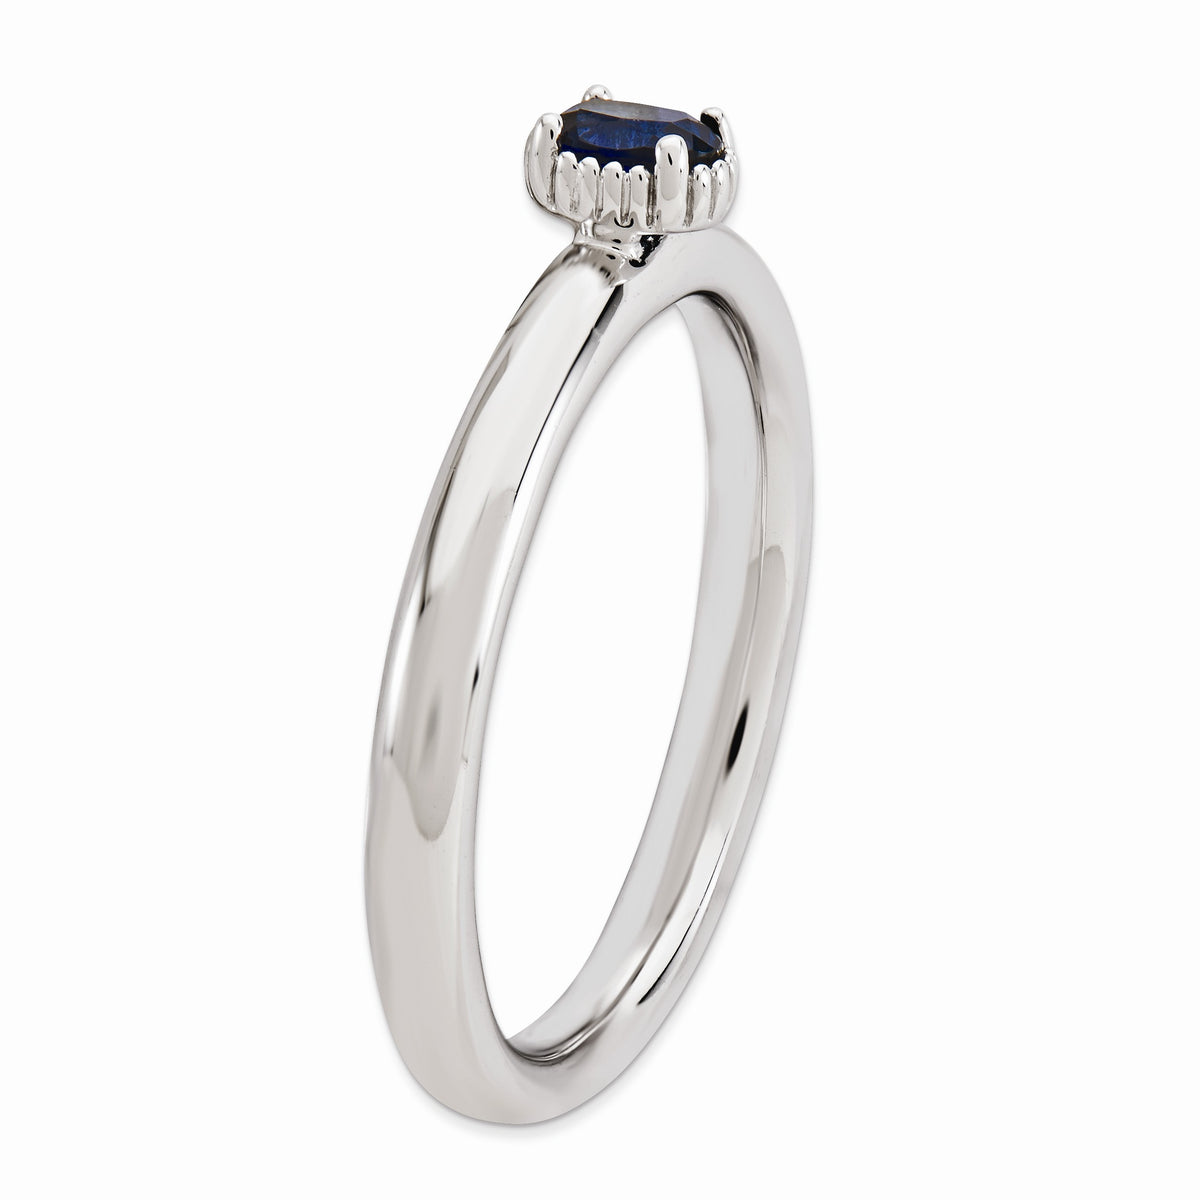 Alternate view of the Sterling Silver Stackable Created Sapphire Oval Single Stone Ring by The Black Bow Jewelry Co.